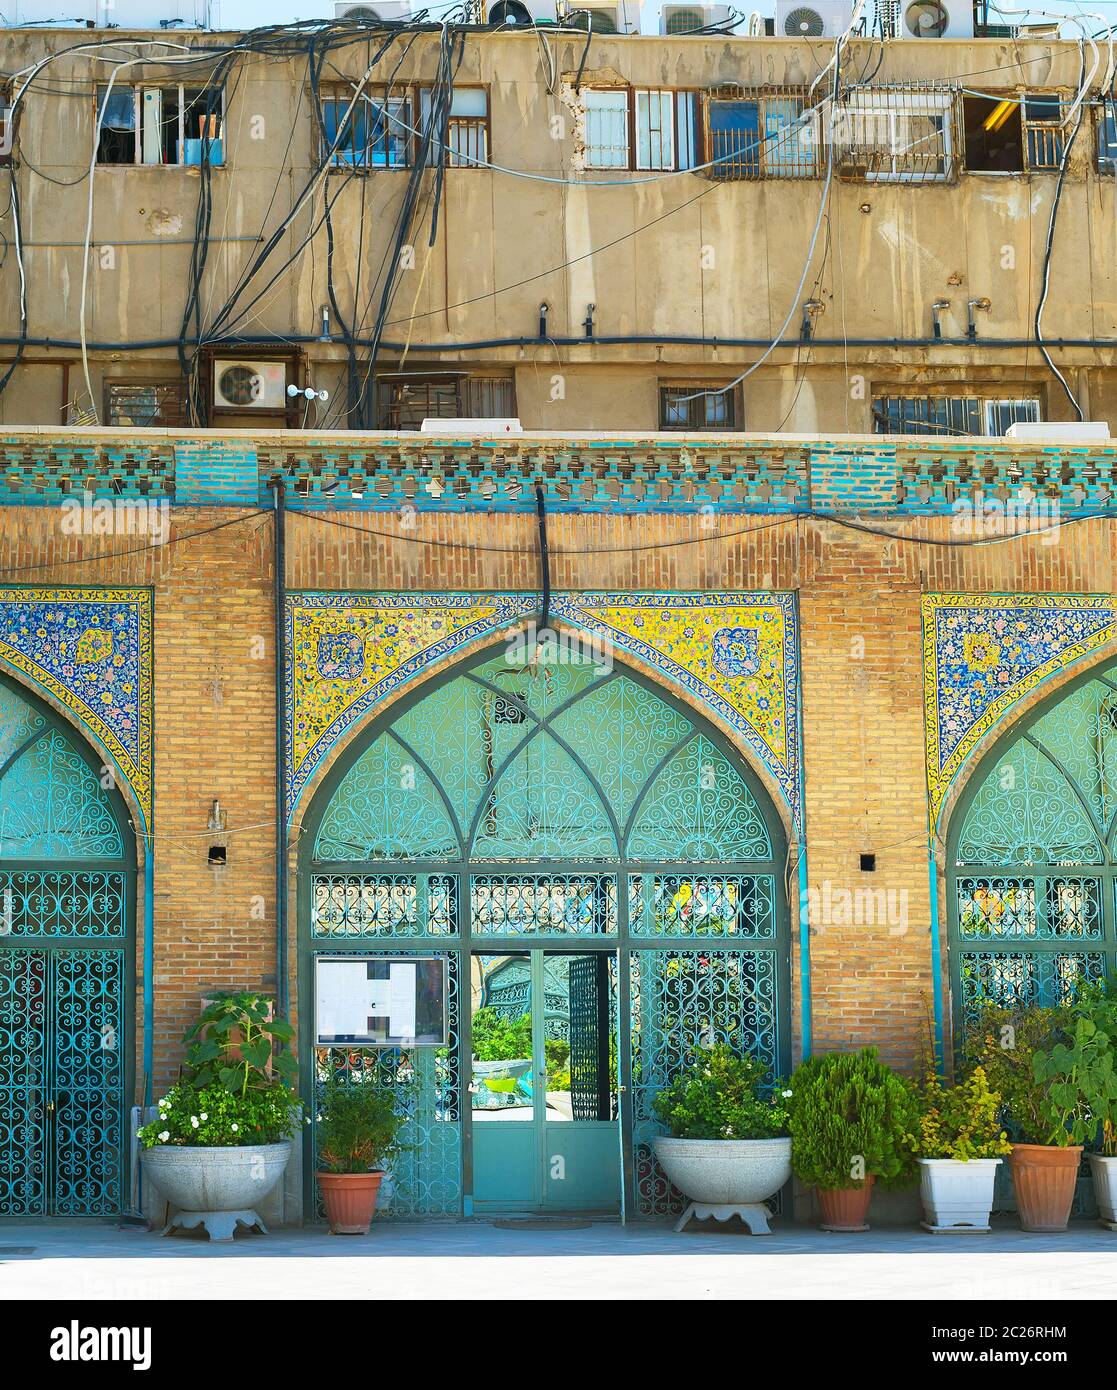 Modern and traditional architecture, Iran Stock Photo